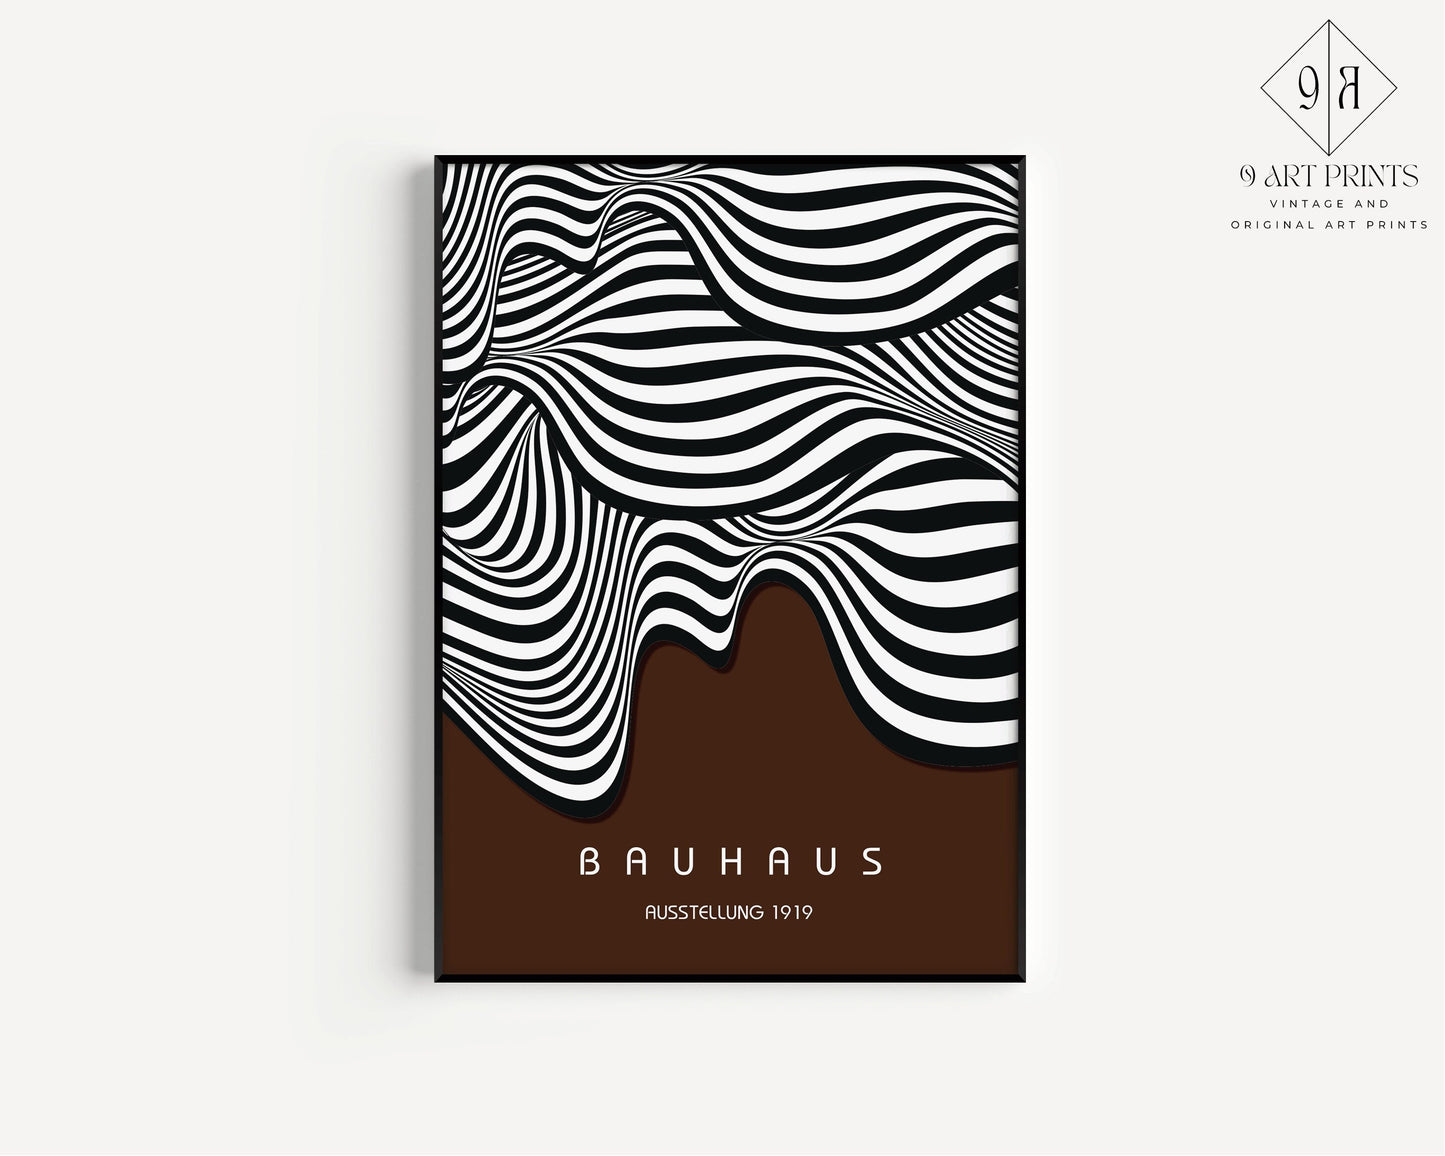 Framed Bauhaus Chocolate Brown Poster Mid Century Modern Museum Art Print 60s Vintage Abstract Ready to hang Home Office Decor Gift Idea